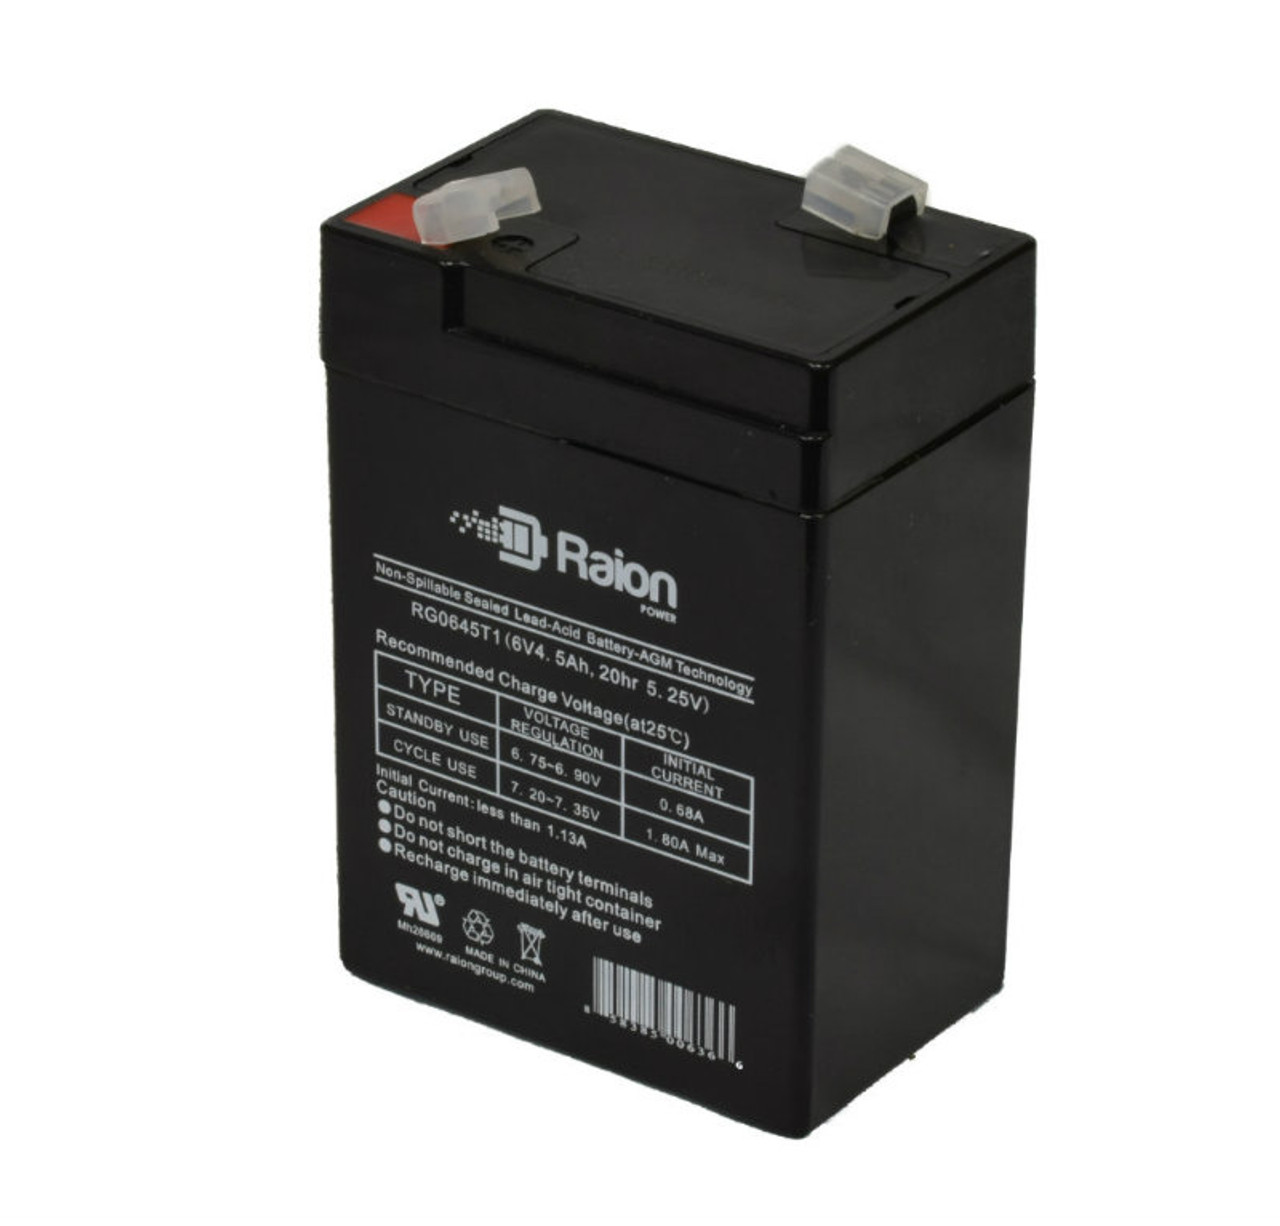 Raion Power RG0645T1 6V 4.5Ah Replacement Battery Cartridge for Aokly Power 3-FM-4